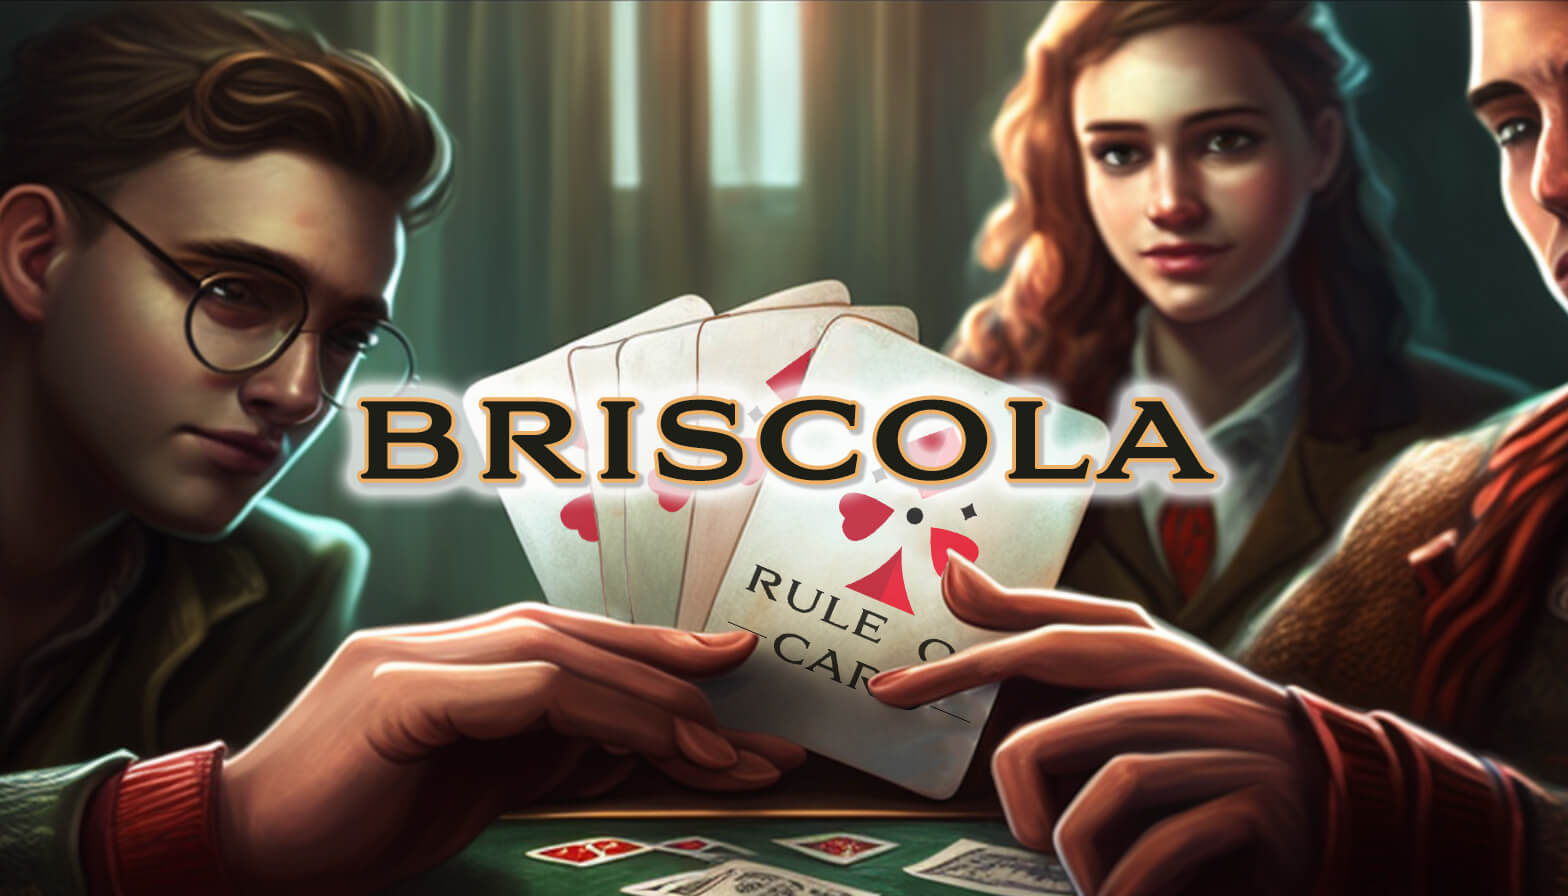 Playing the card game Briscola